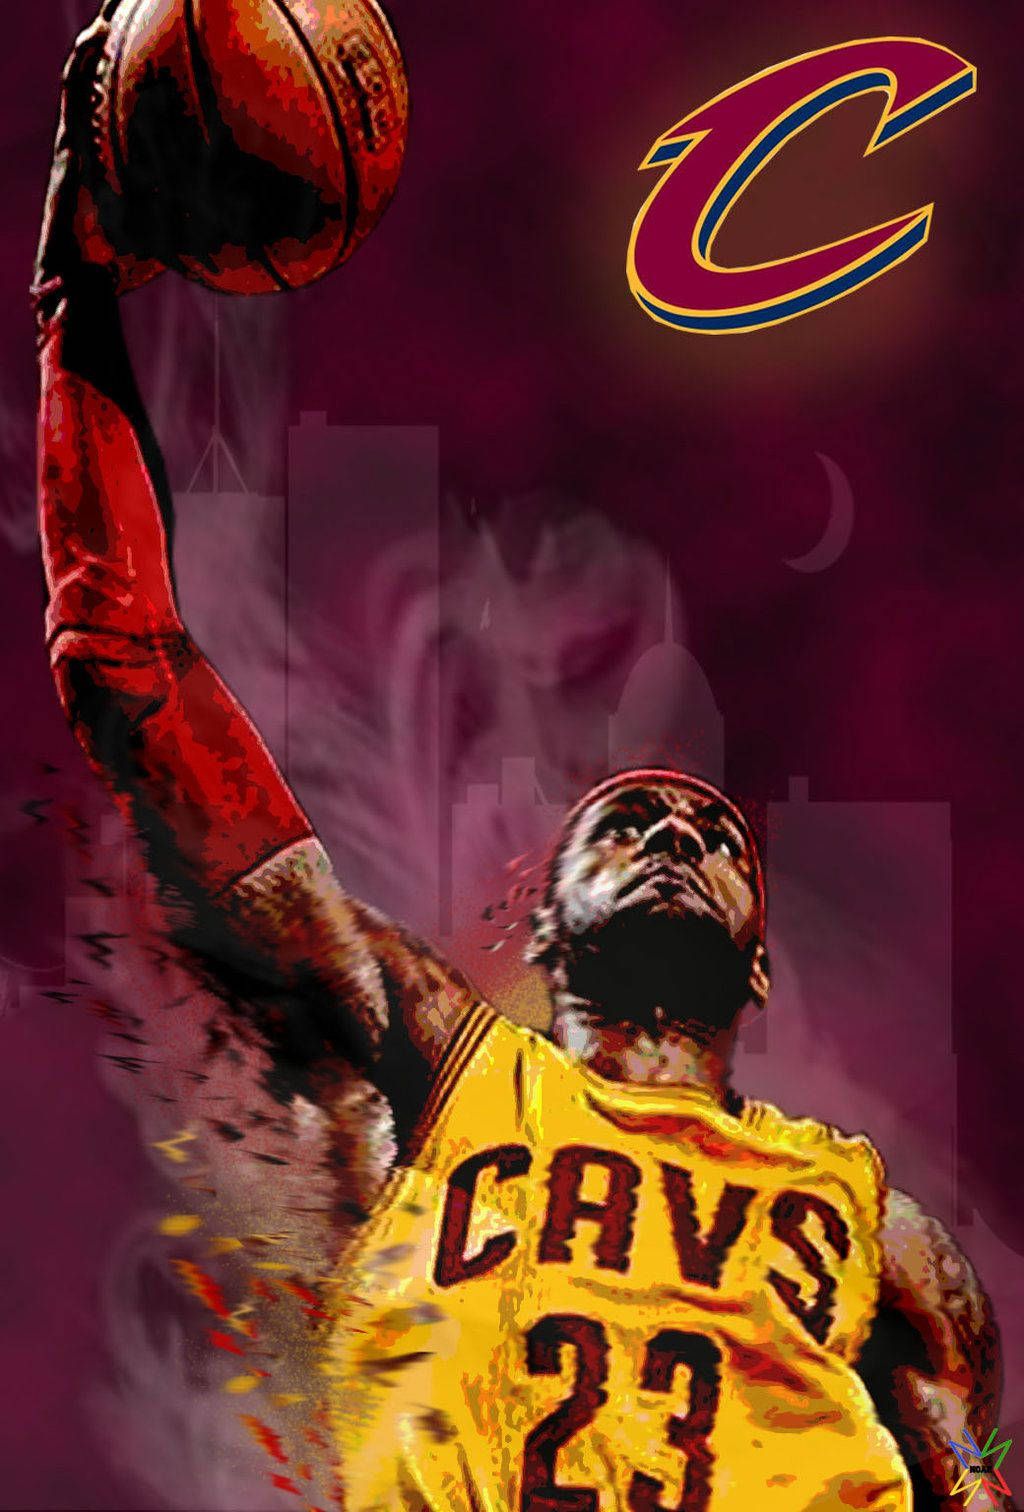 Download Basketball star Lebron James in his Cleveland Cavaliers jersey. Wallpaper